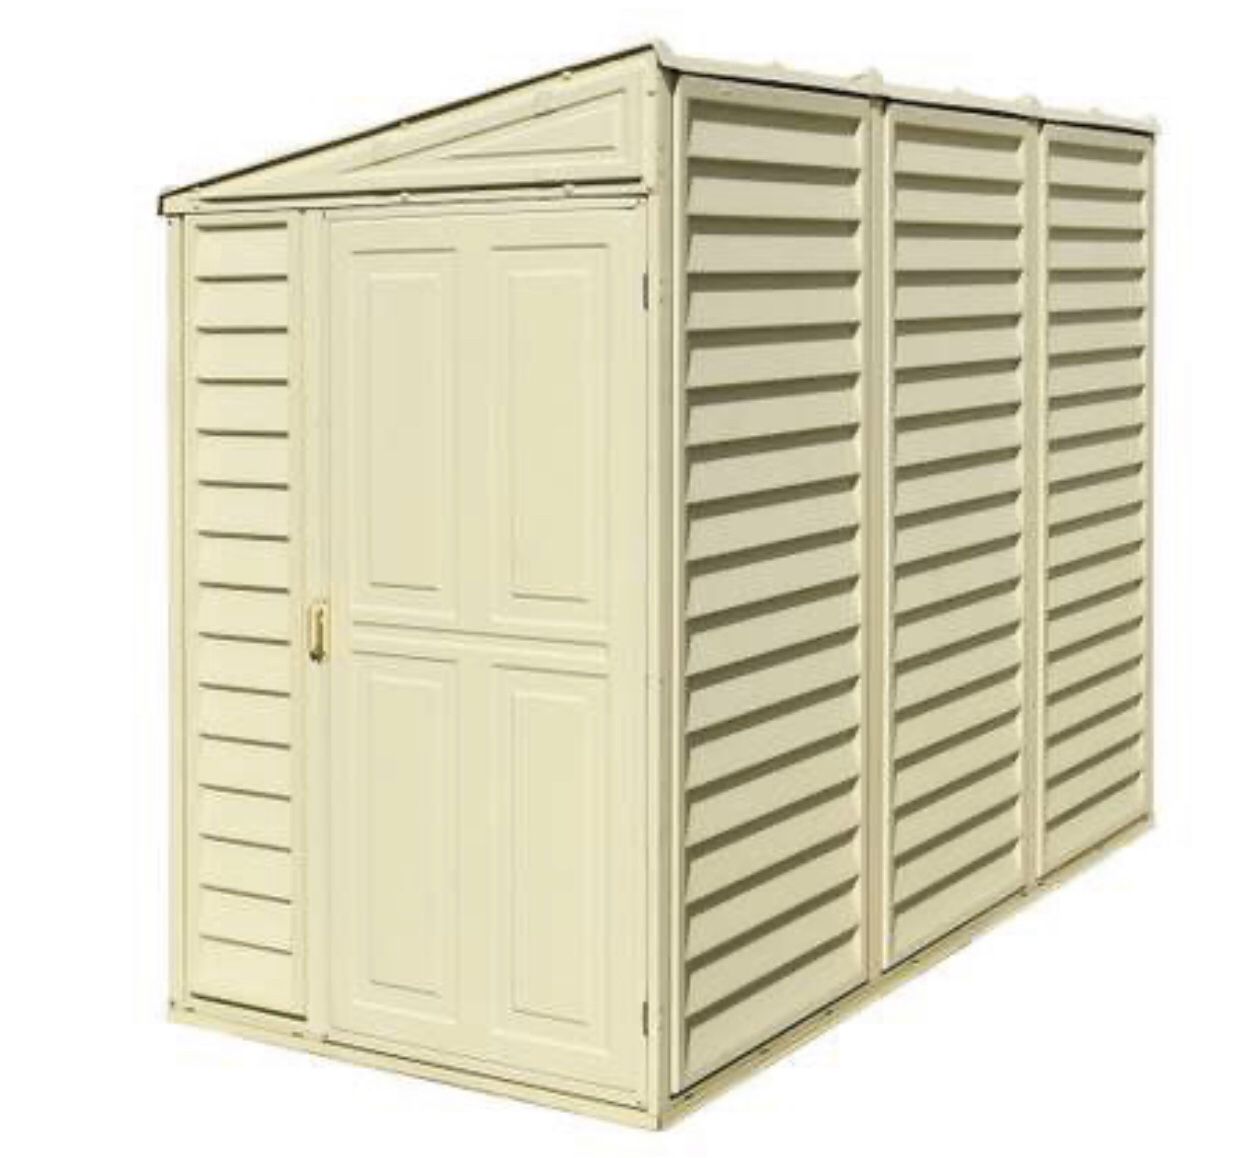 Shed Duramax 4ft x 8ft Sidemate Vinyl Resin Outdoor Storage Shed